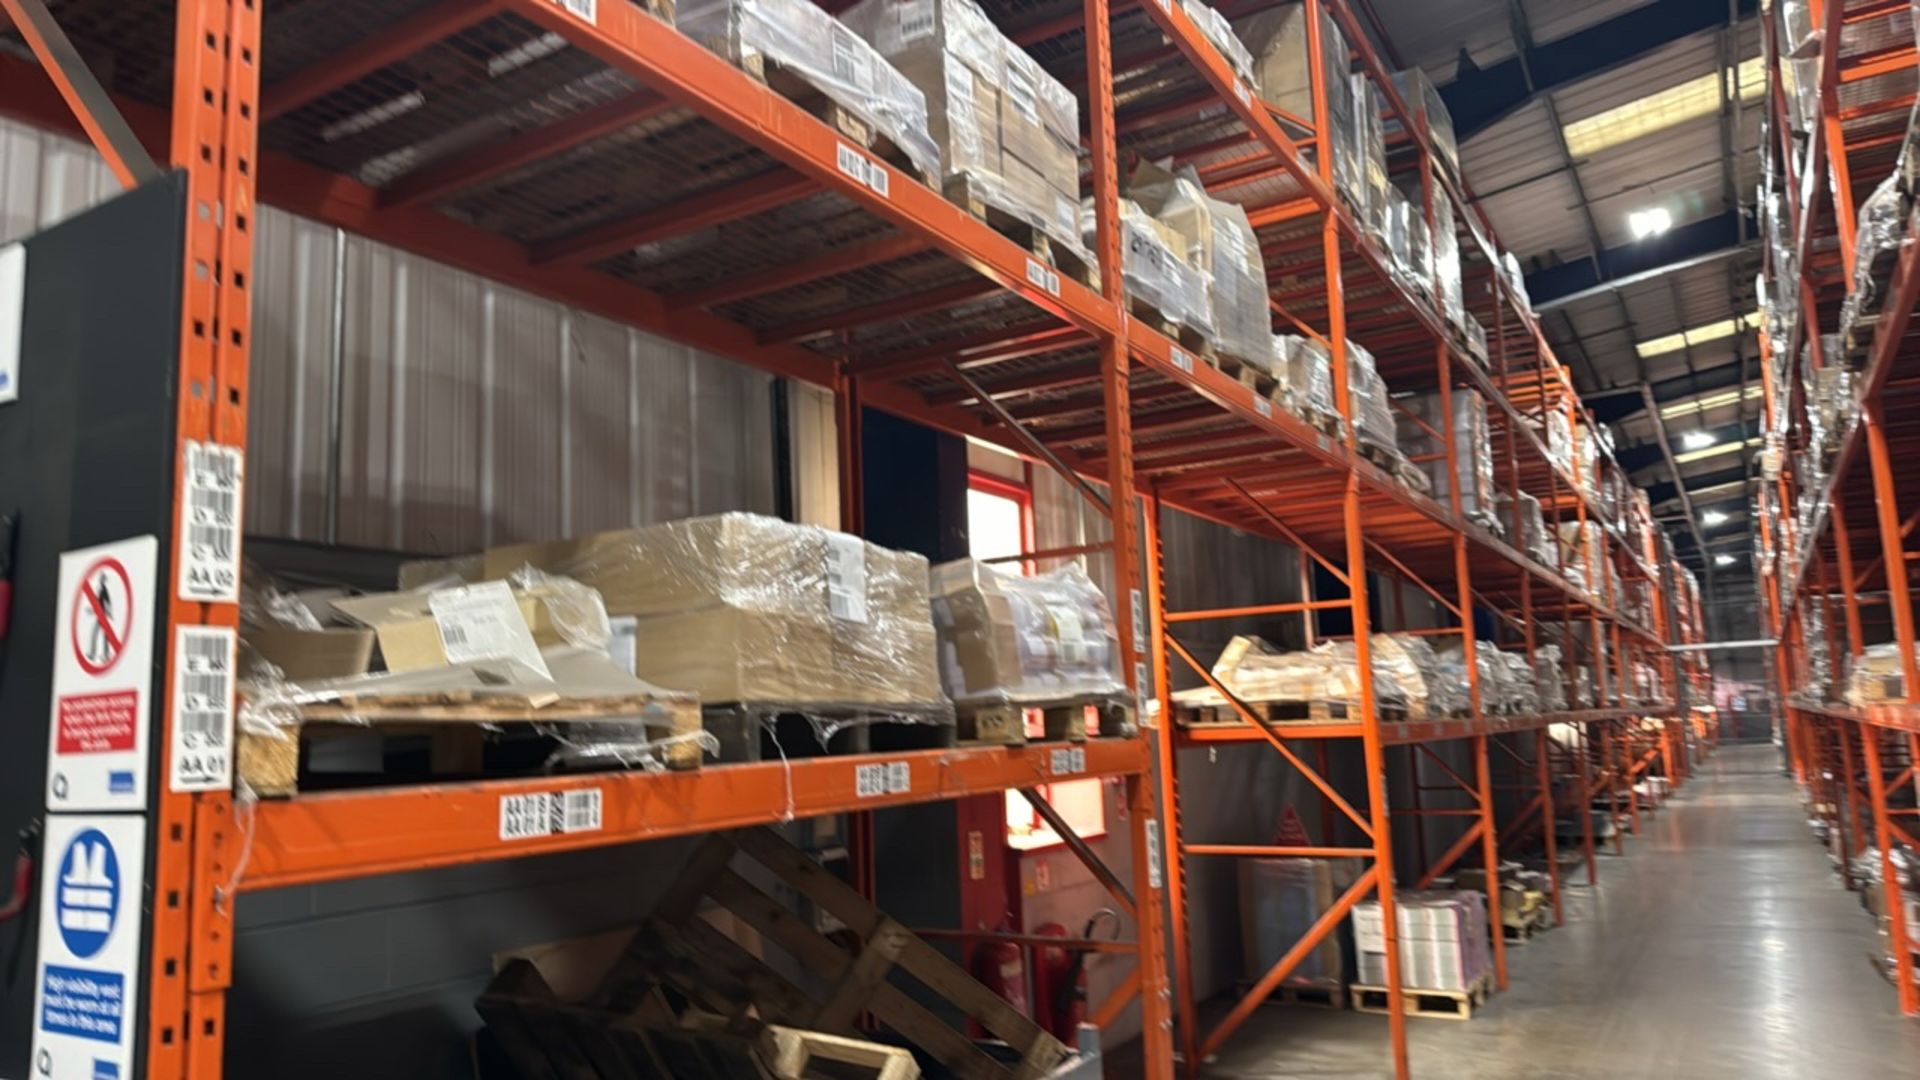 23 Bays Of Boltless Pallet Racking - Image 5 of 10